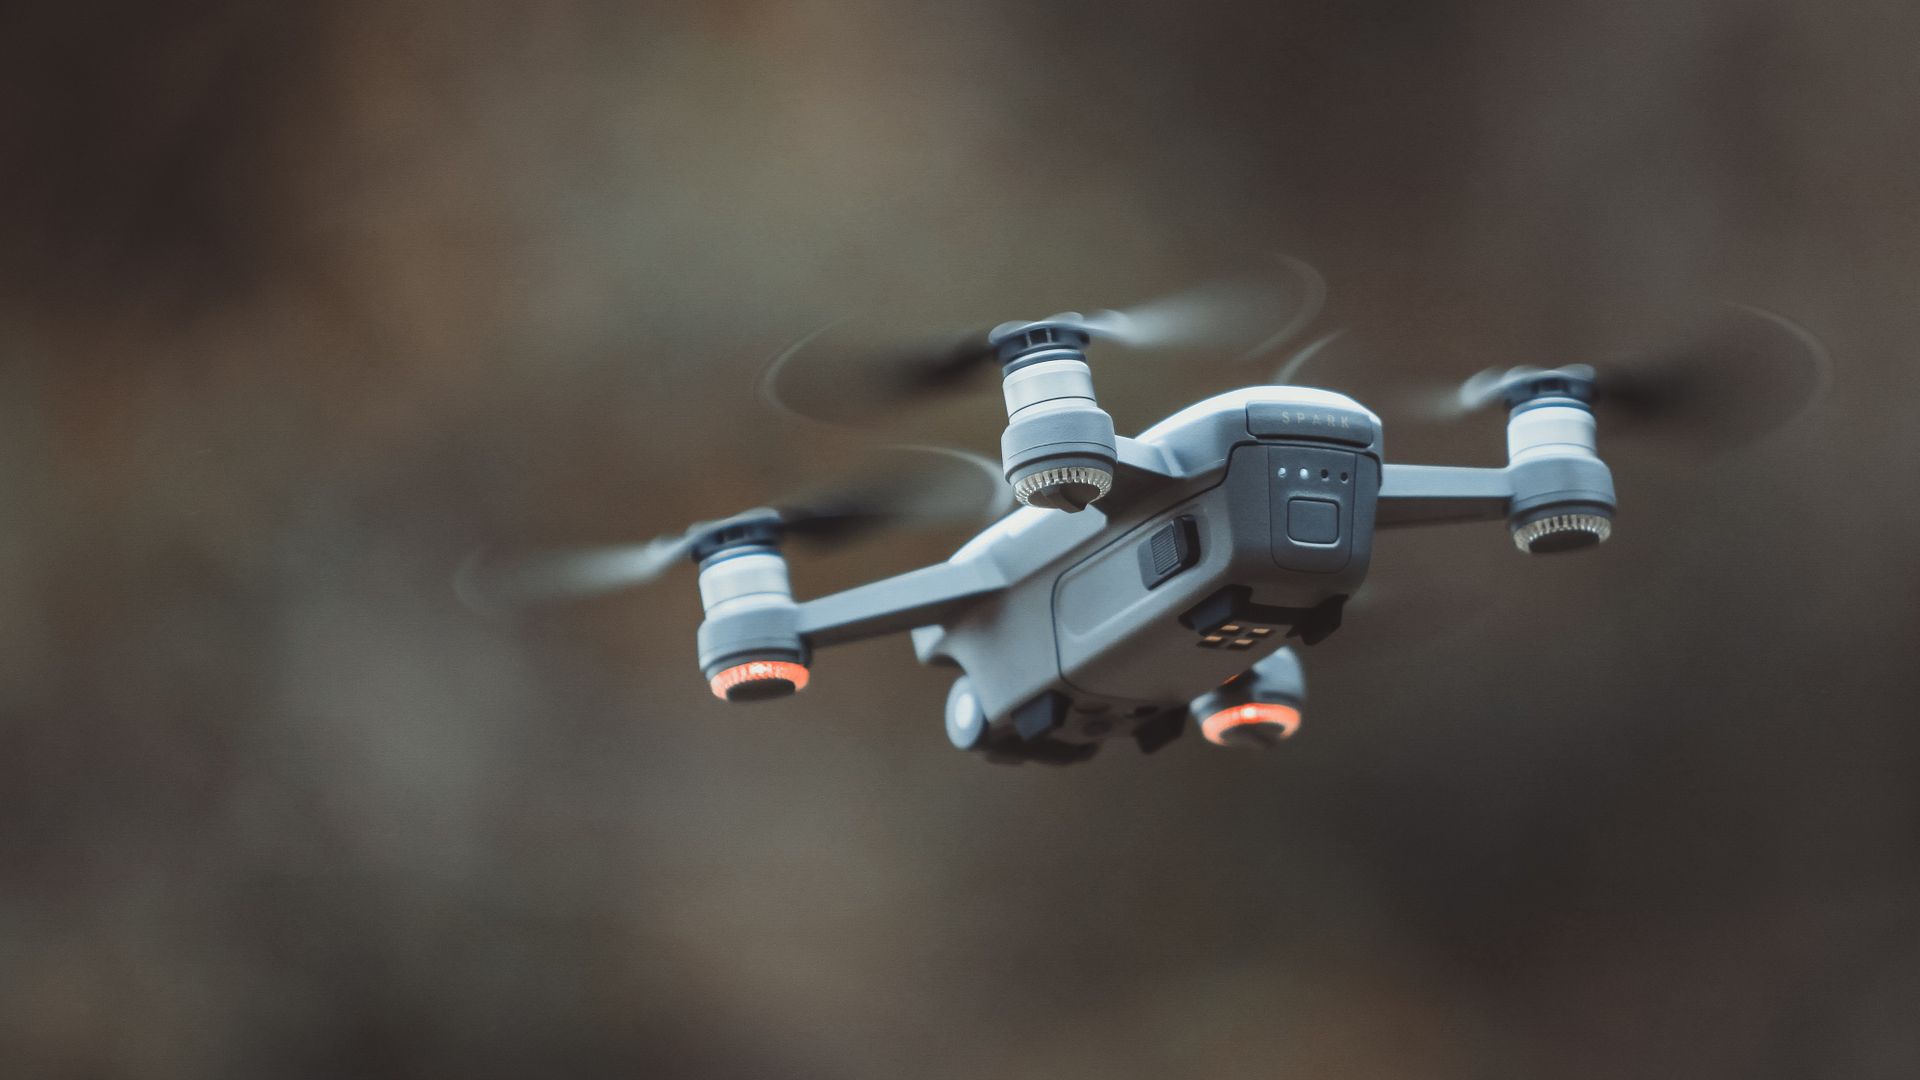 Grey Quadcopter Drone Blurred Background Wallpaper